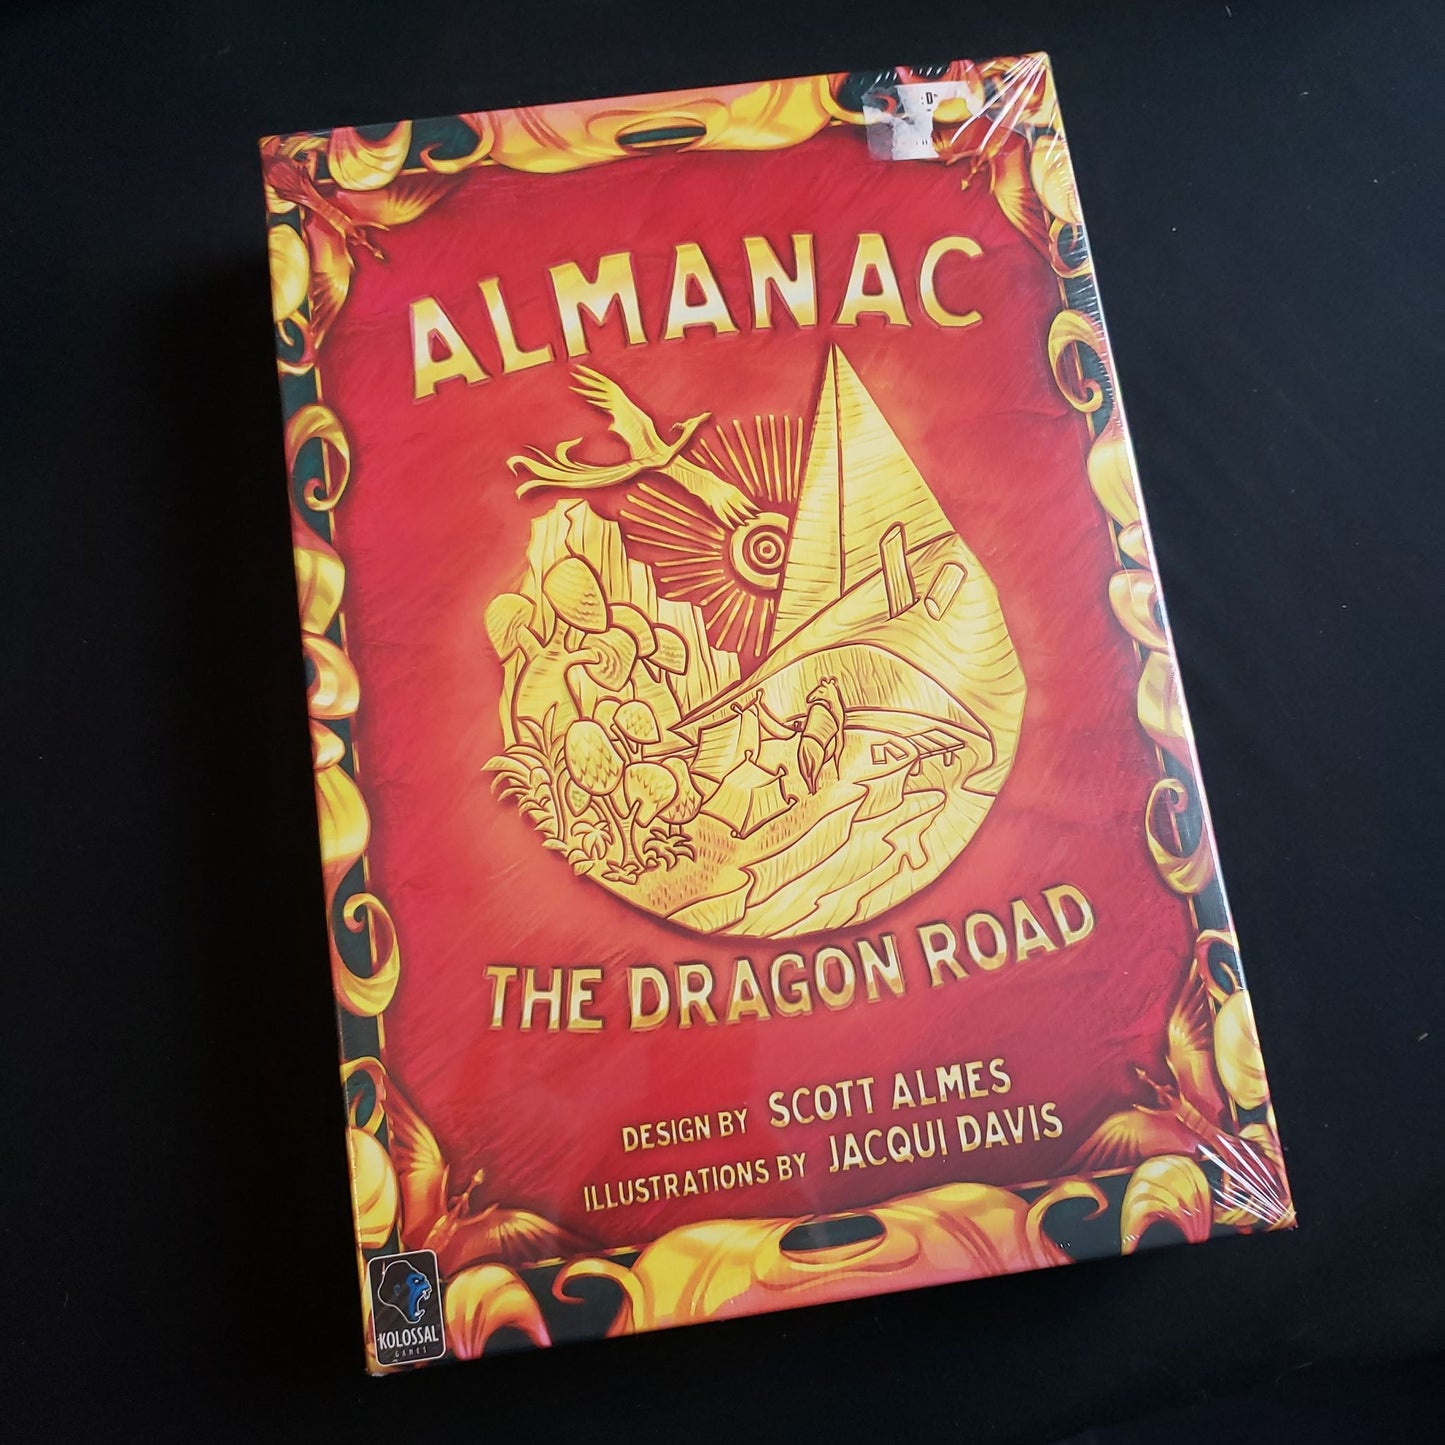 Image shows the front cover of the box of the Almanac: the Dragon Road board game